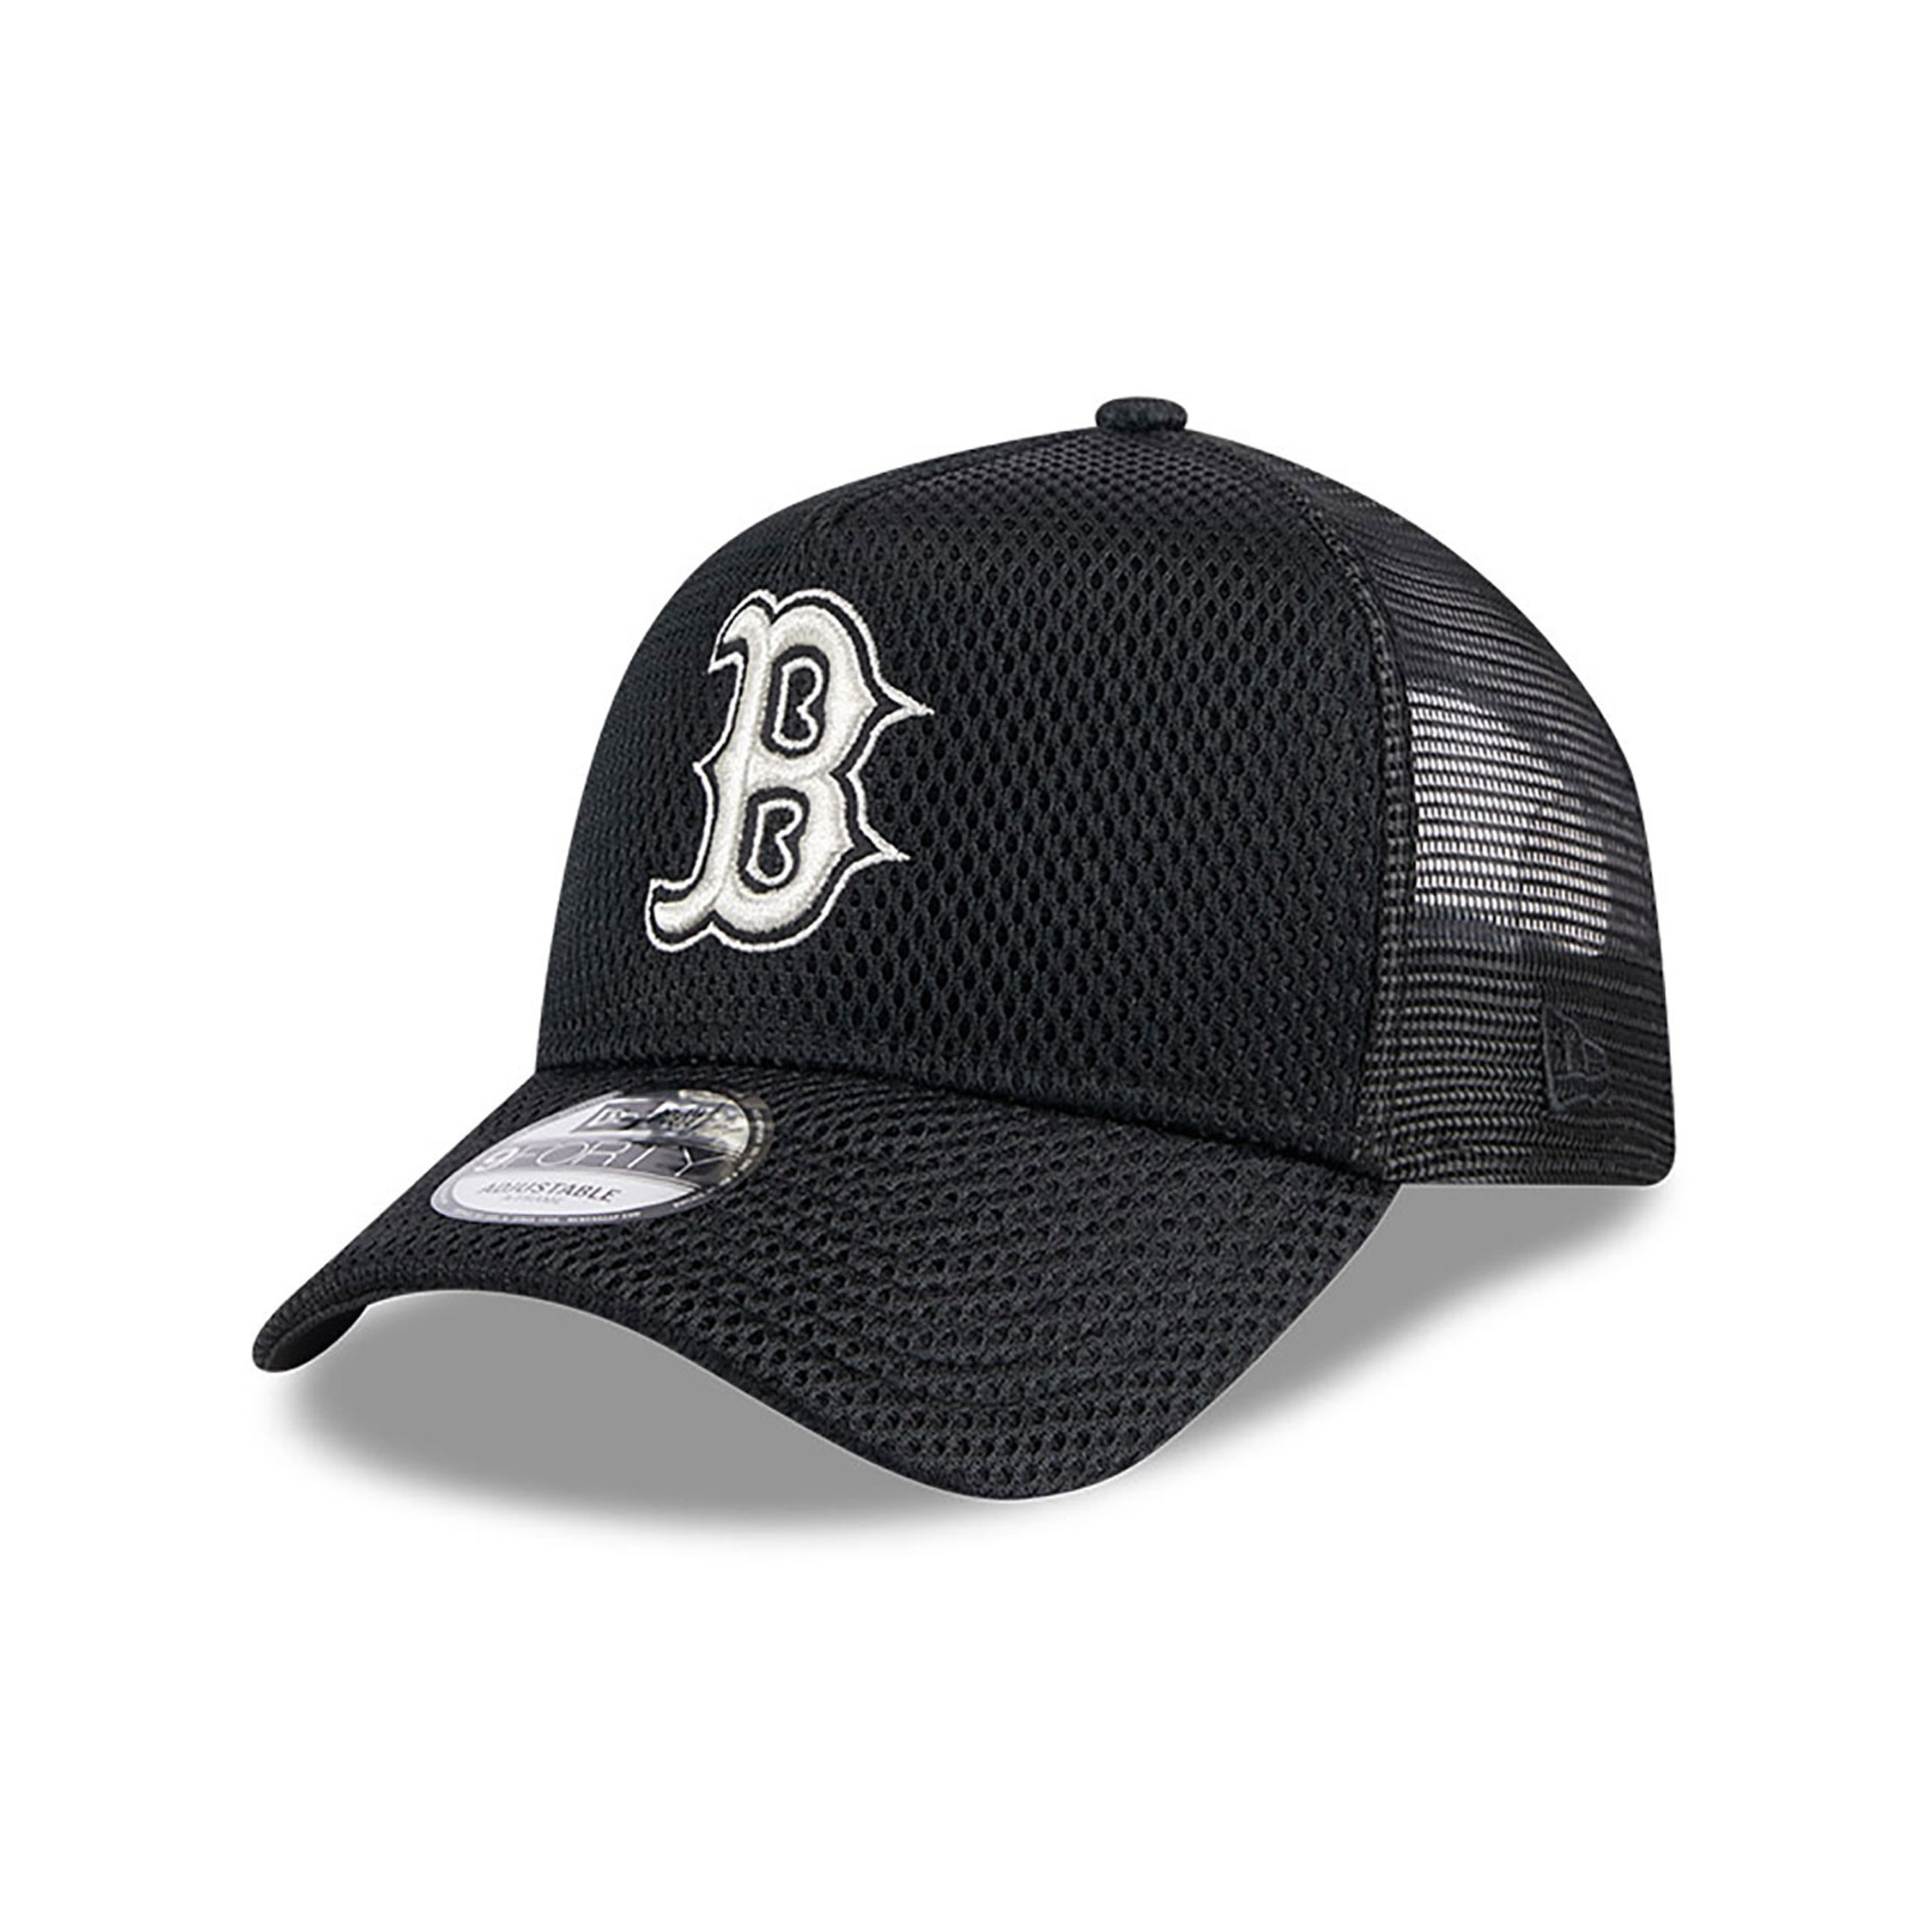 Boston Red Sox City Mesh Black 9FORTY A-Frame Adjustable Trucker Cap